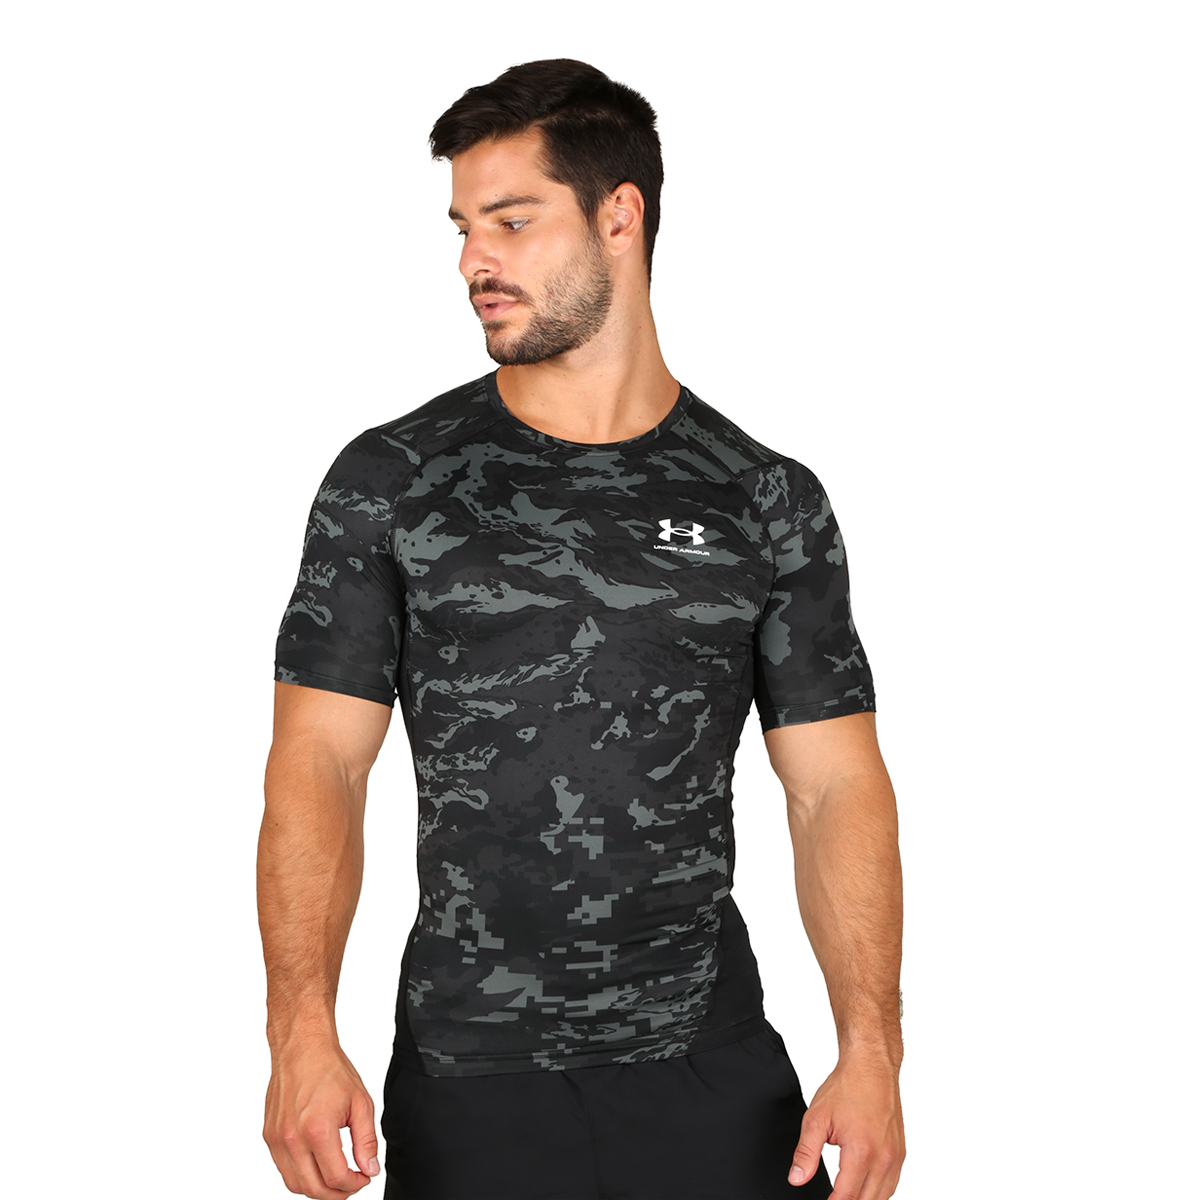 Remera Under Armour Heat Gear Short Sleeve,  image number null